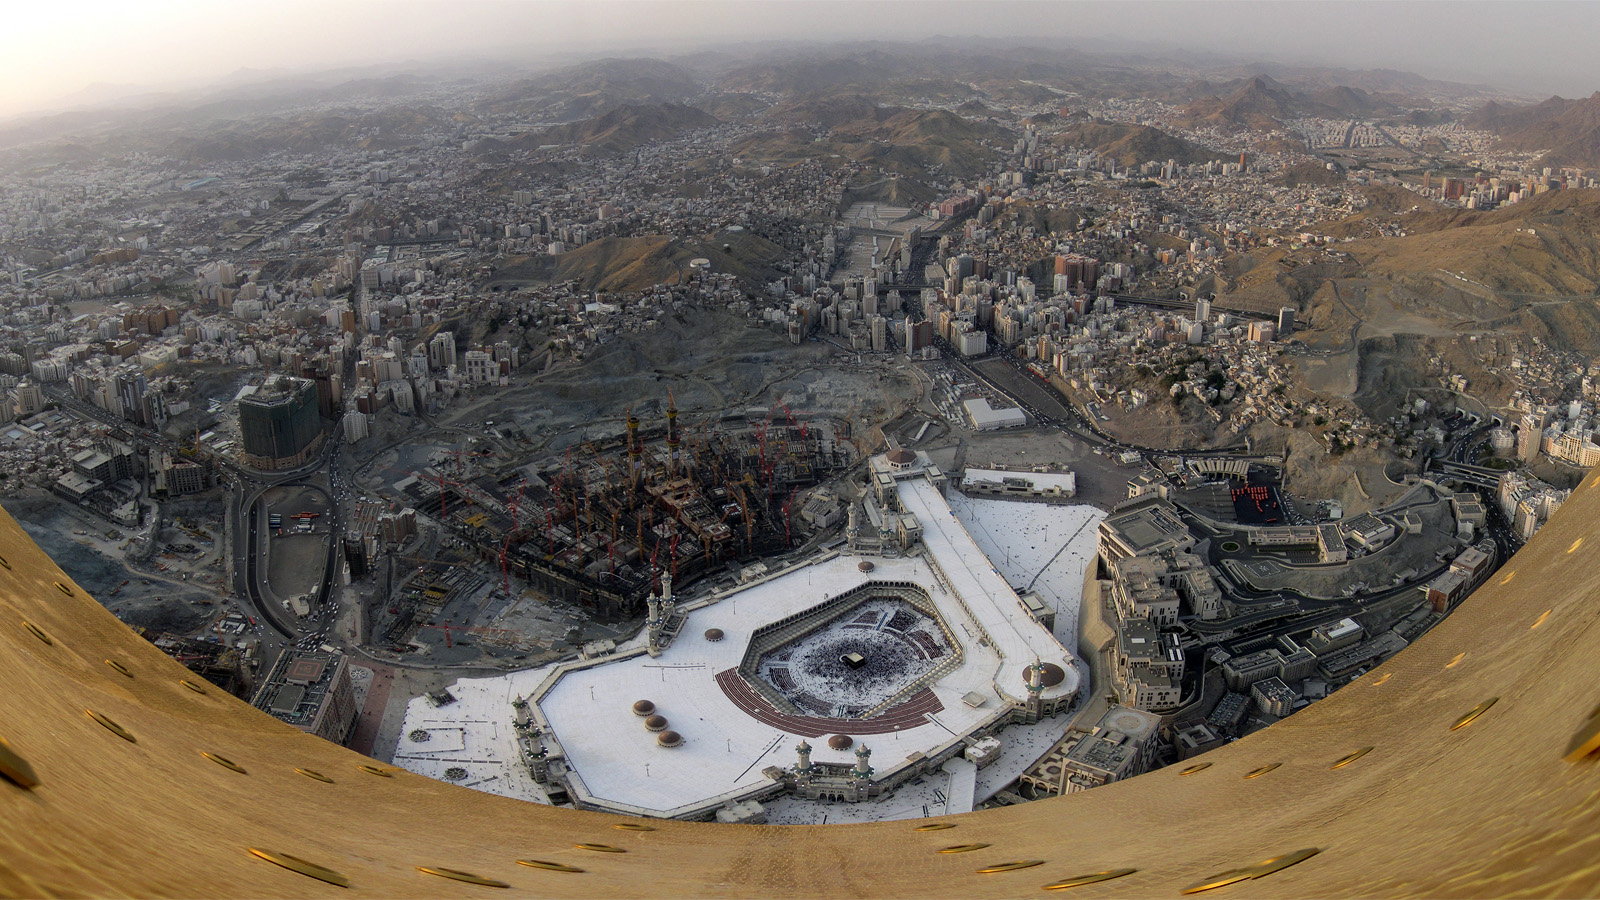 22 Breathtaking Views From The World’s Tallest Buildings